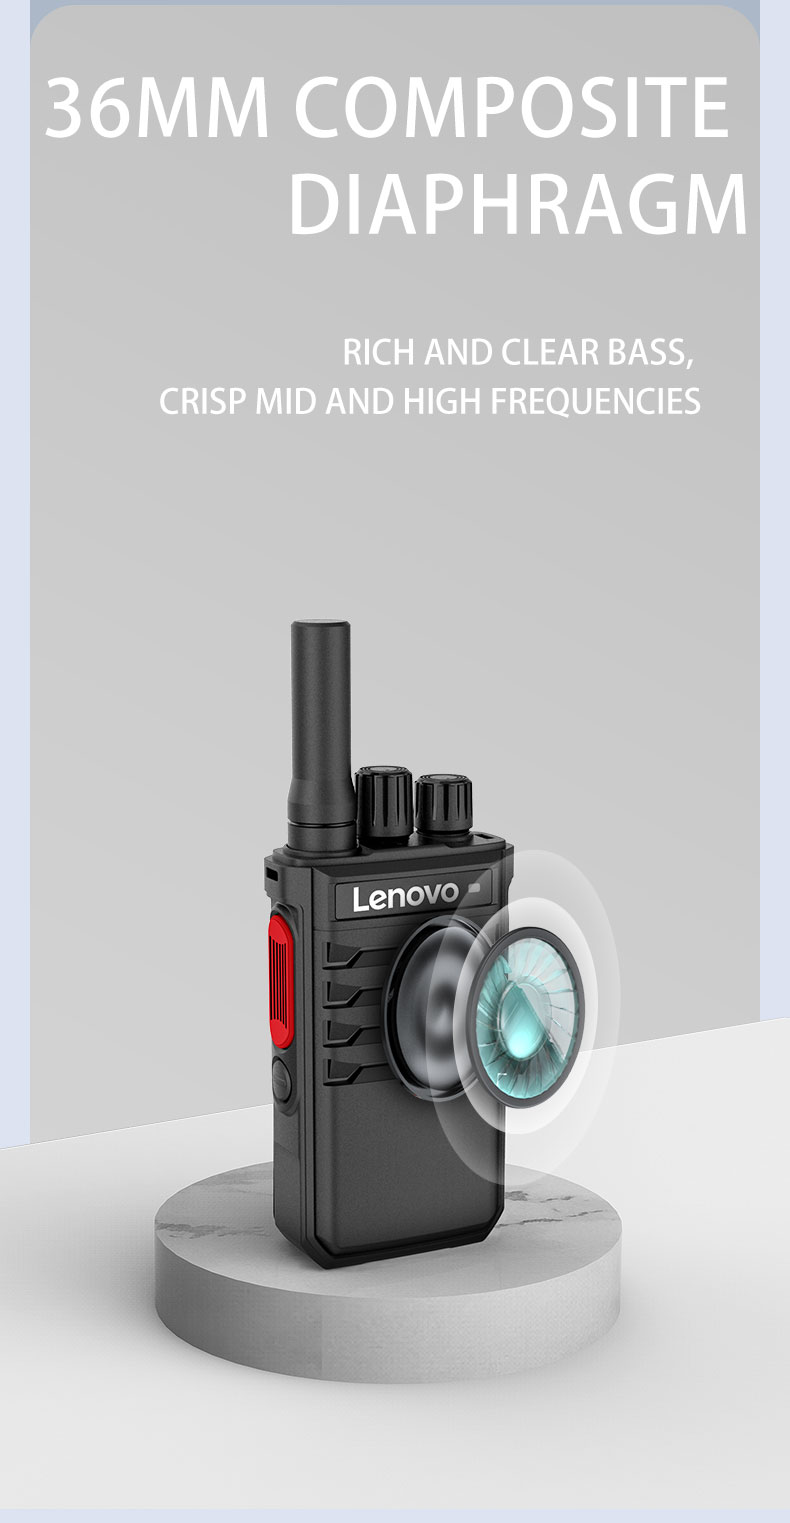 Lenovo C138 Walkie-Talkie with 36mm Composite